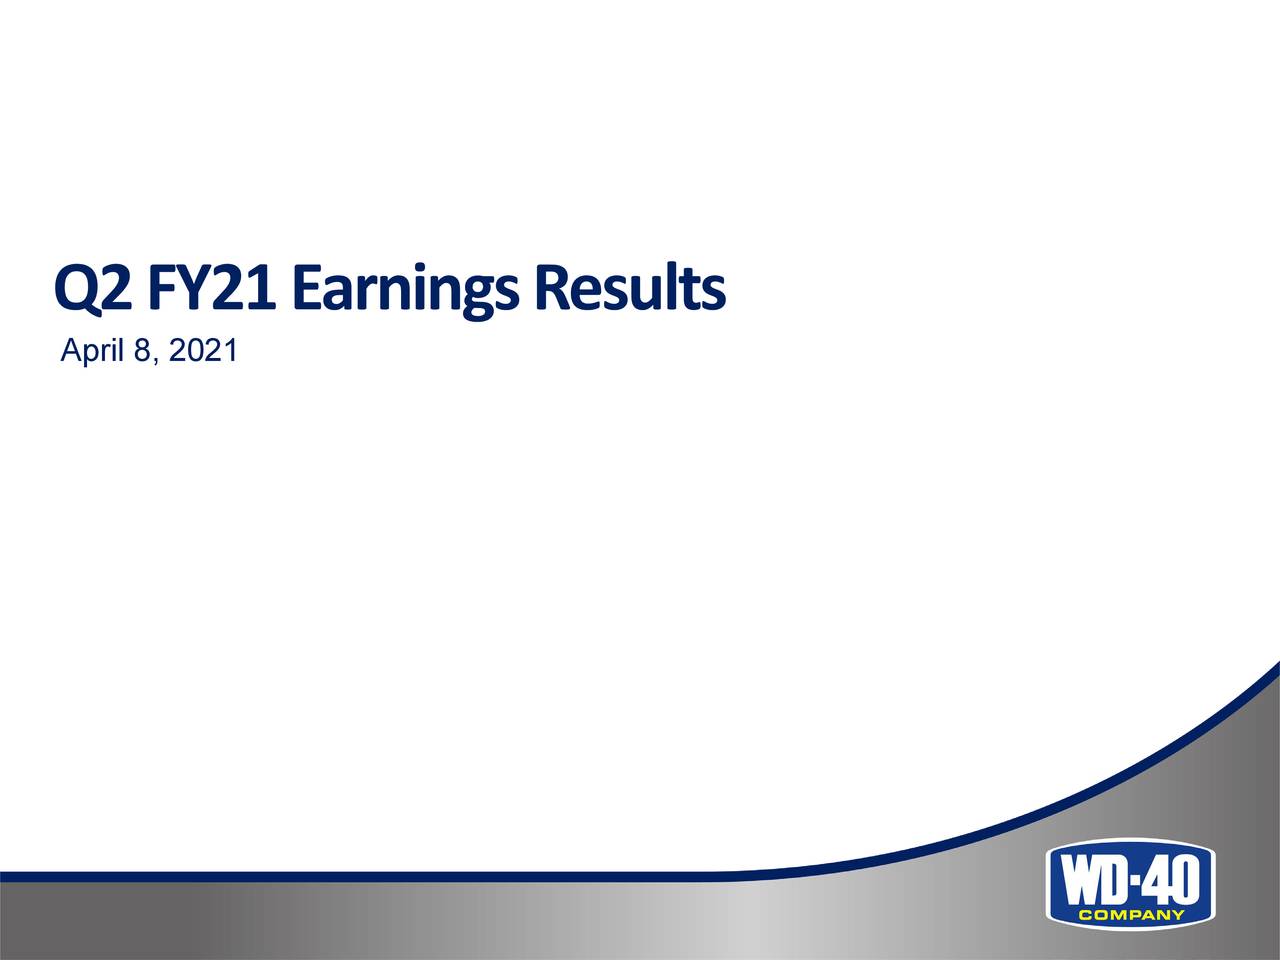 Q2 FY21 Earnings Results